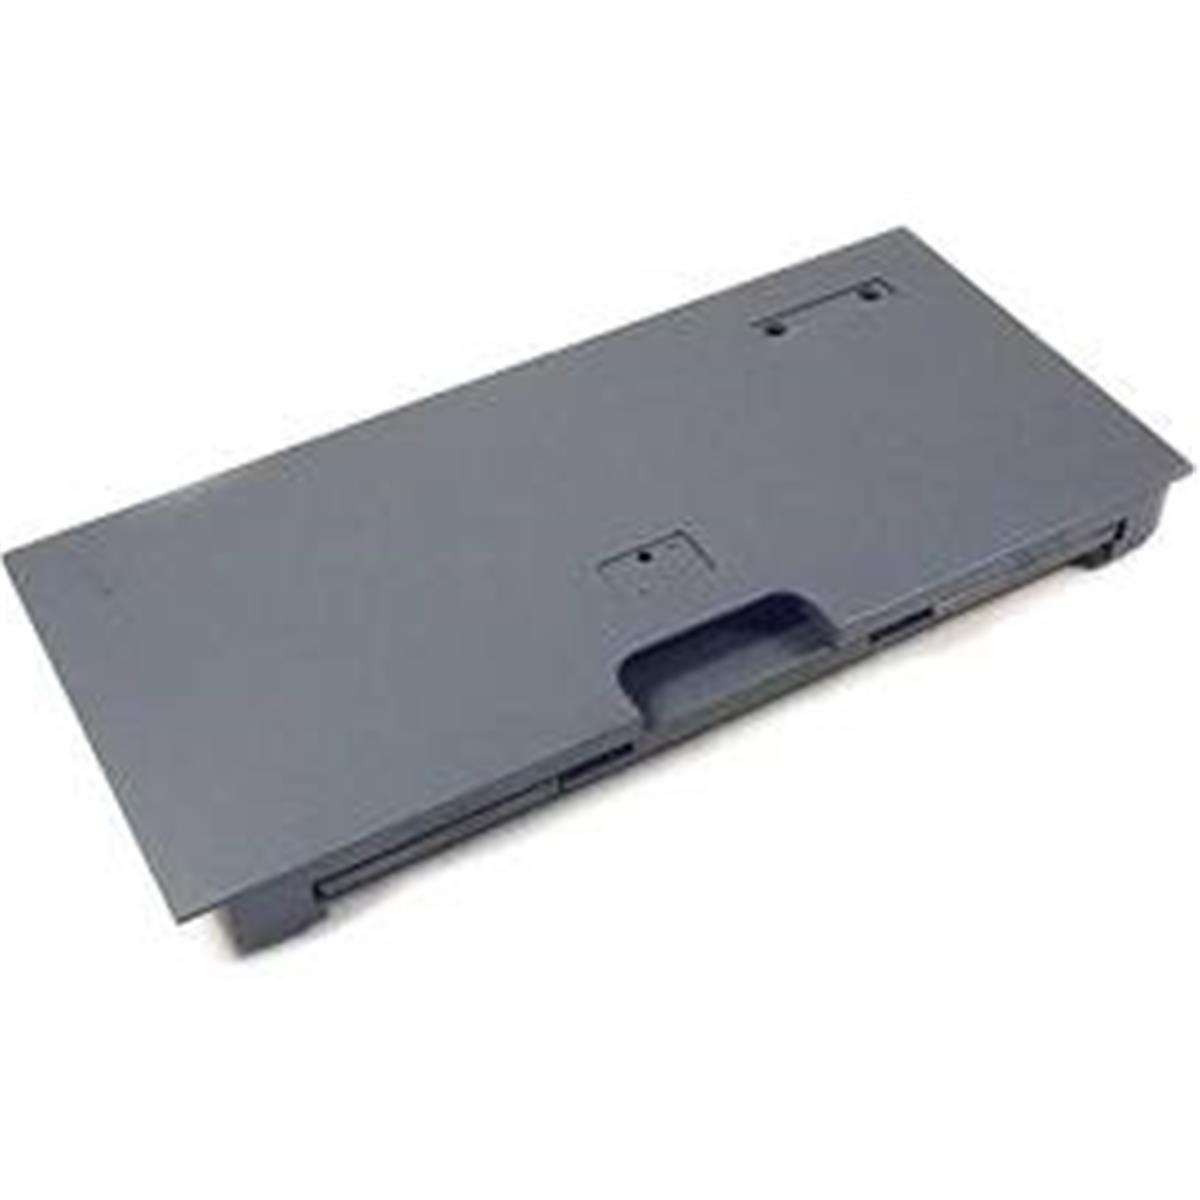 RM1-1490-OEM MP Tray 1 Support Assembly for 2410, 2420 & 2430 -  HP